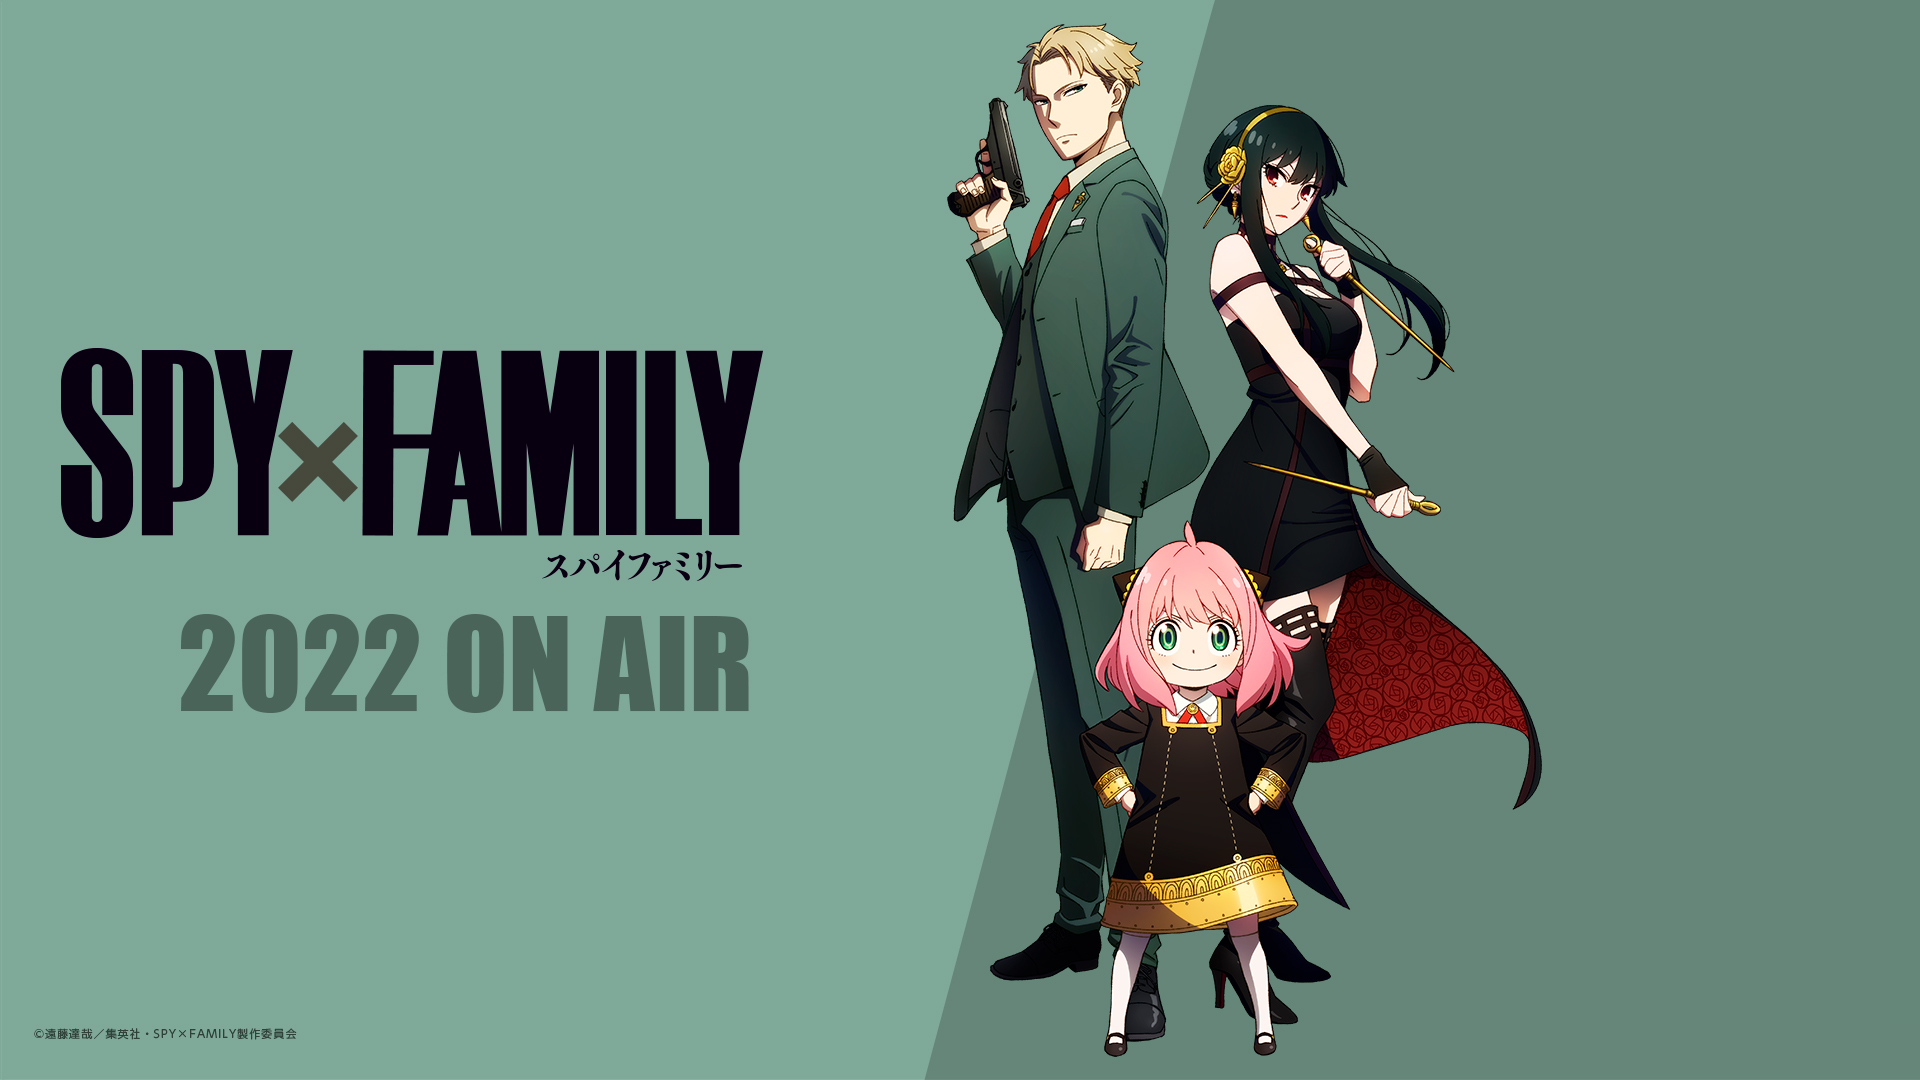 SPY x FAMILY Live Wallpaper Wallpaper Engine  rSpyxFamily